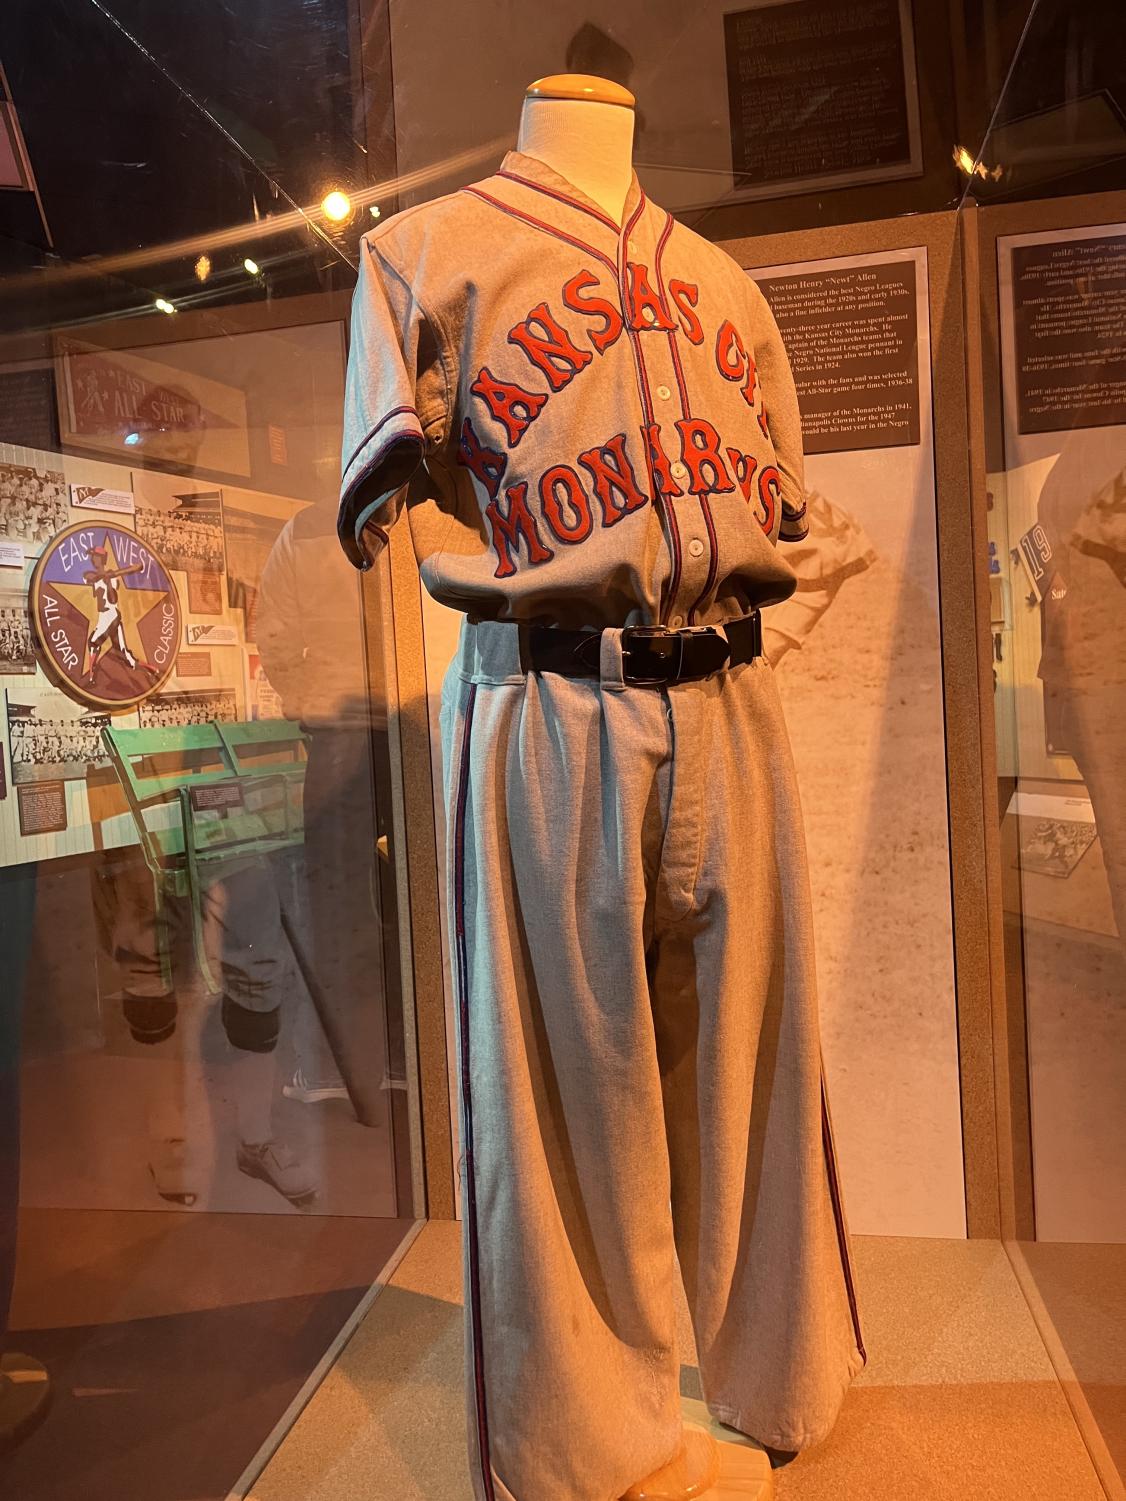 Baseball jersey worn by Neil Robinson for the Memphis Red Sox